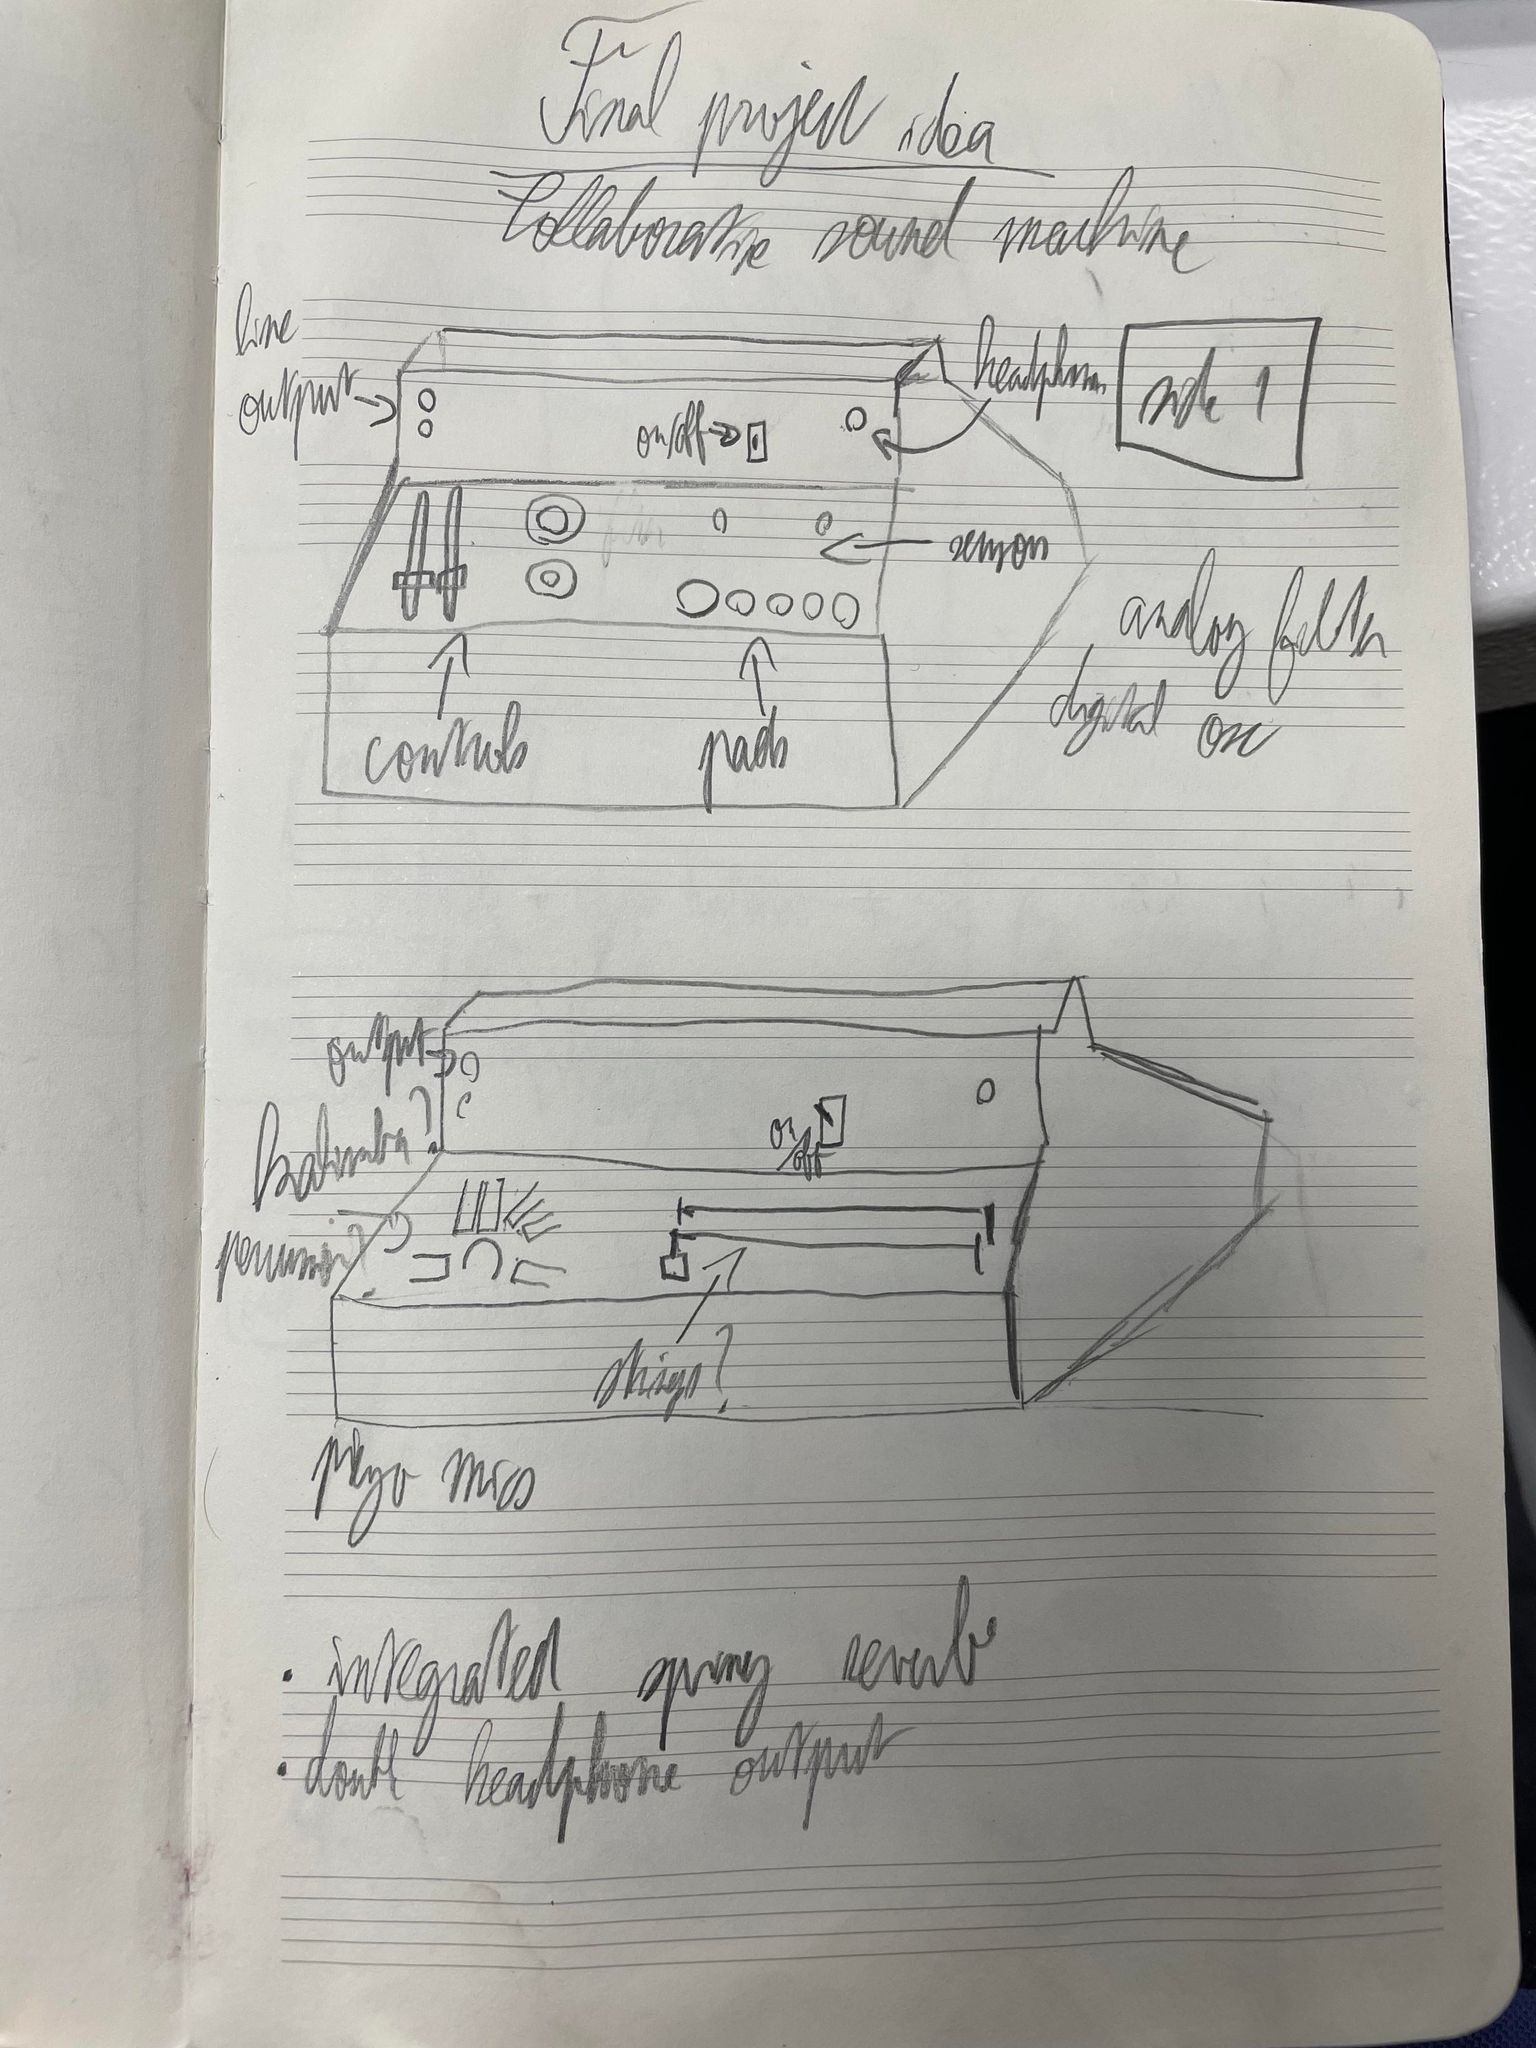 Initial Idea for a collaborative instrument